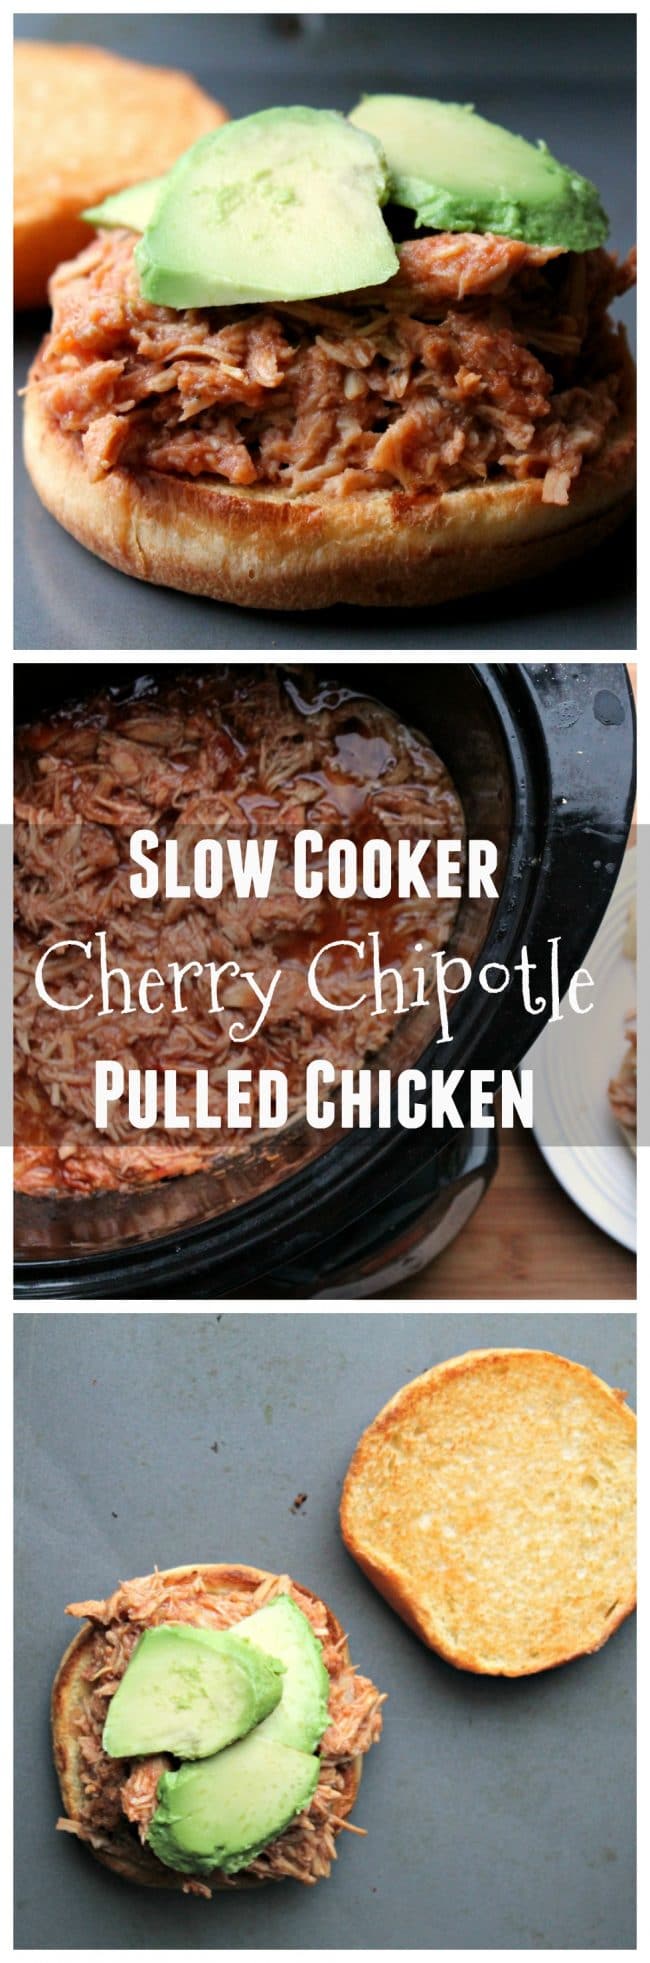 SLOW COOKER Cherry Chipotle Pulled Chicken Sandwiches